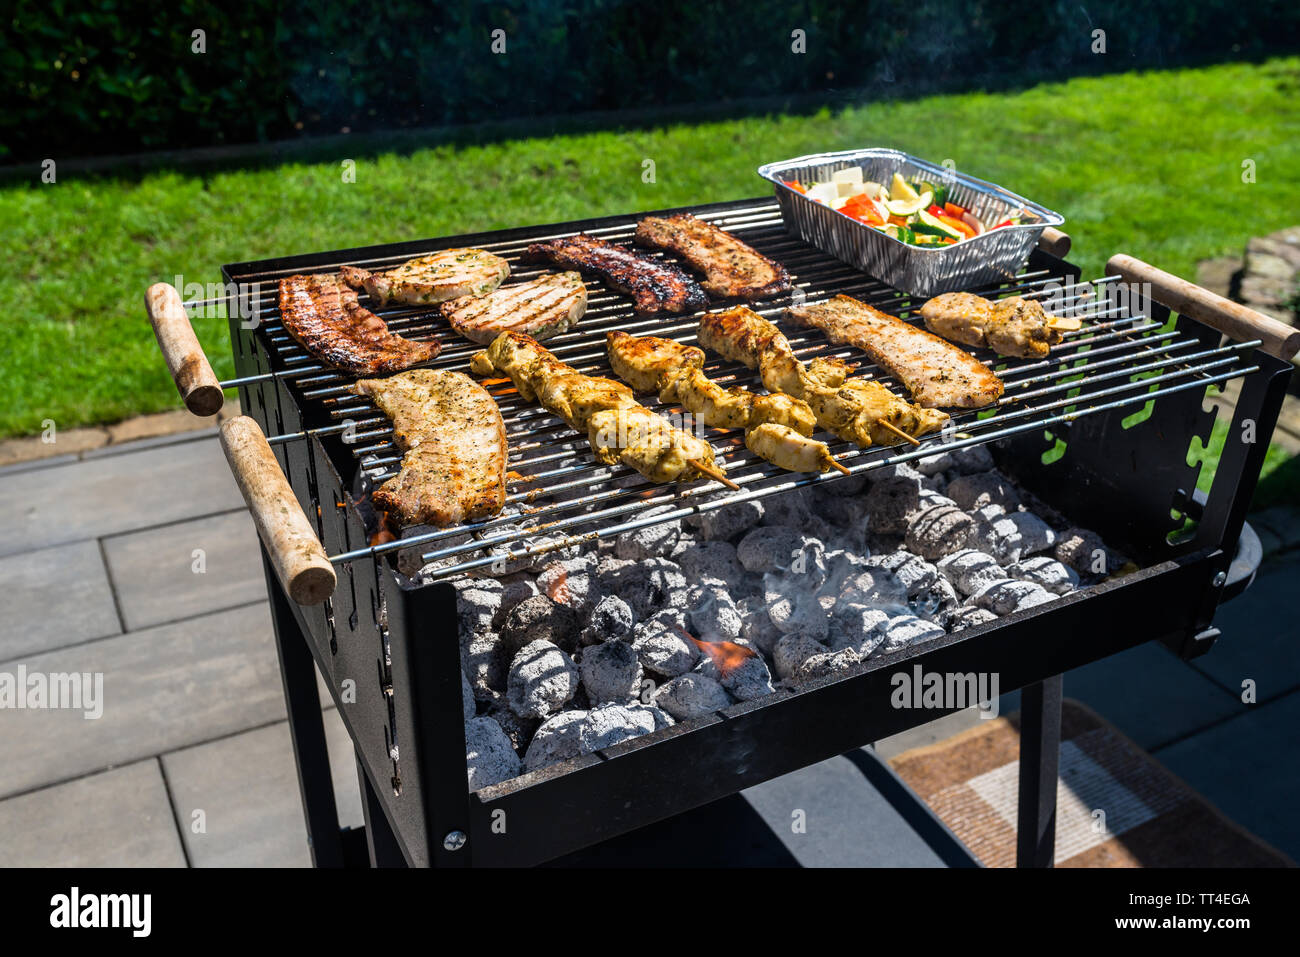 Different types meat fried on the home grill, on a garden on the paving stone Stock Photo Alamy